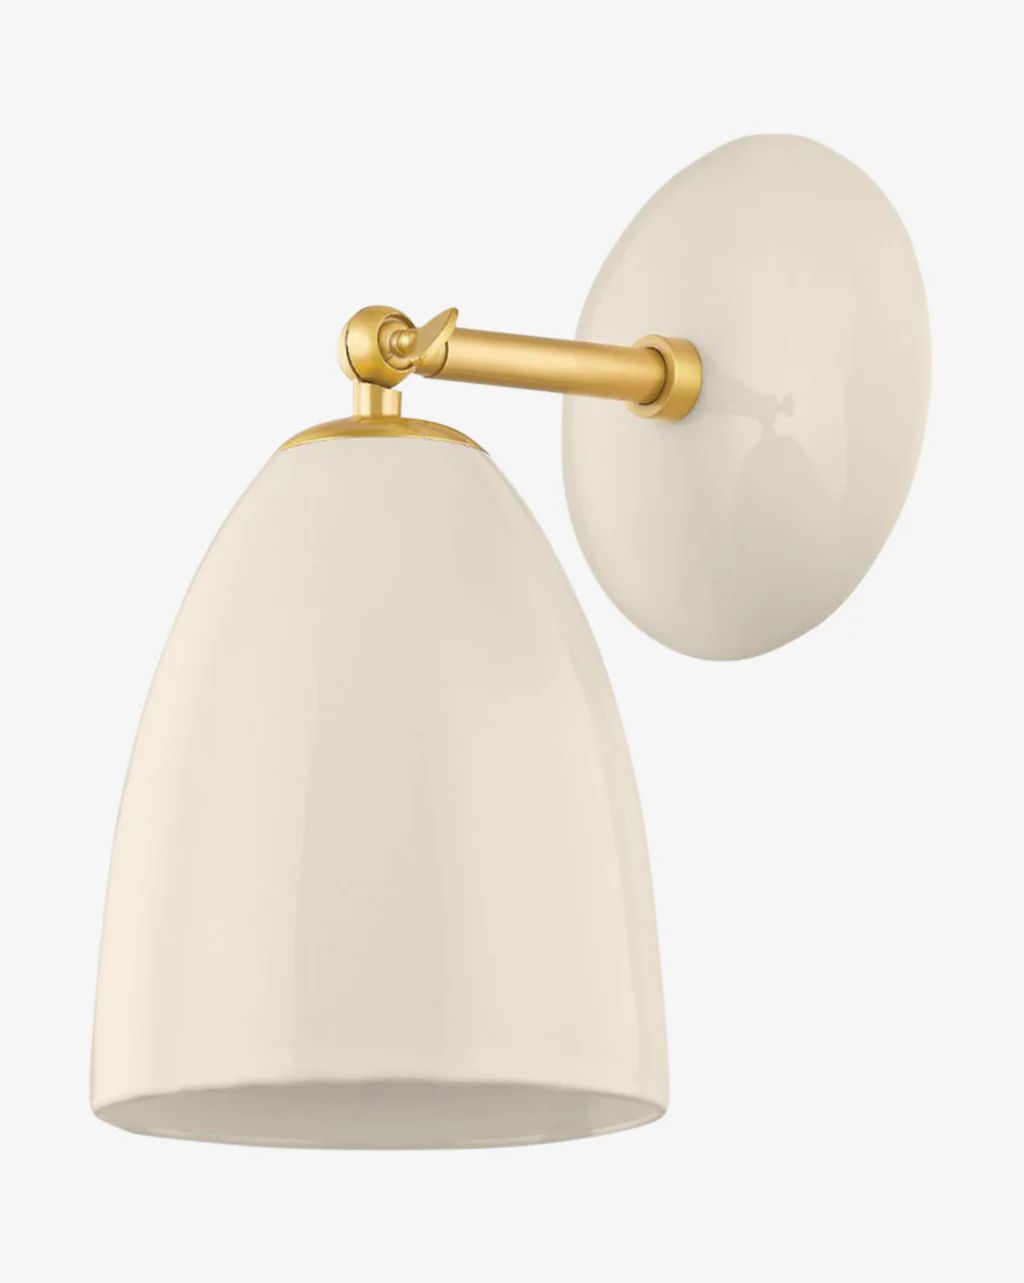 Kirsten Wall Sconce | McGee & Co.